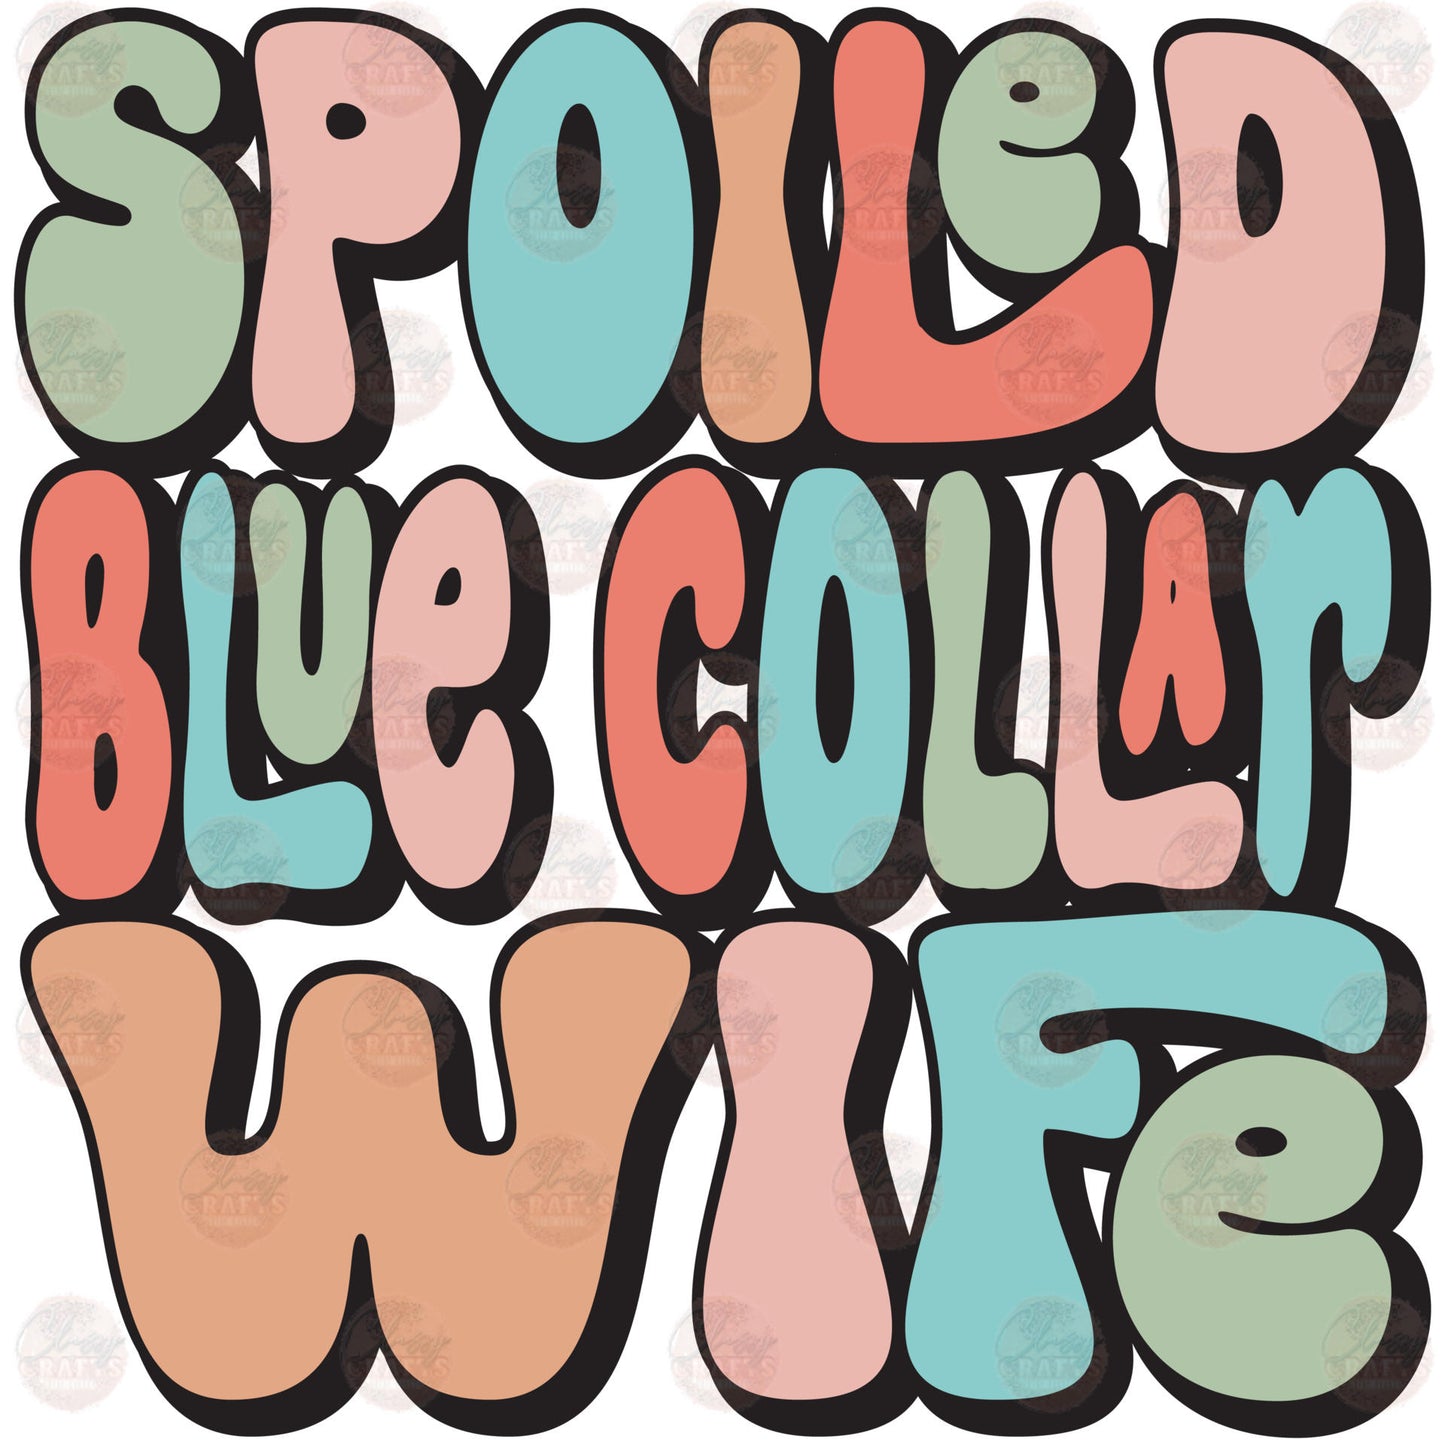 Spoiled Blue Collar Wife - Sublimation Transfers